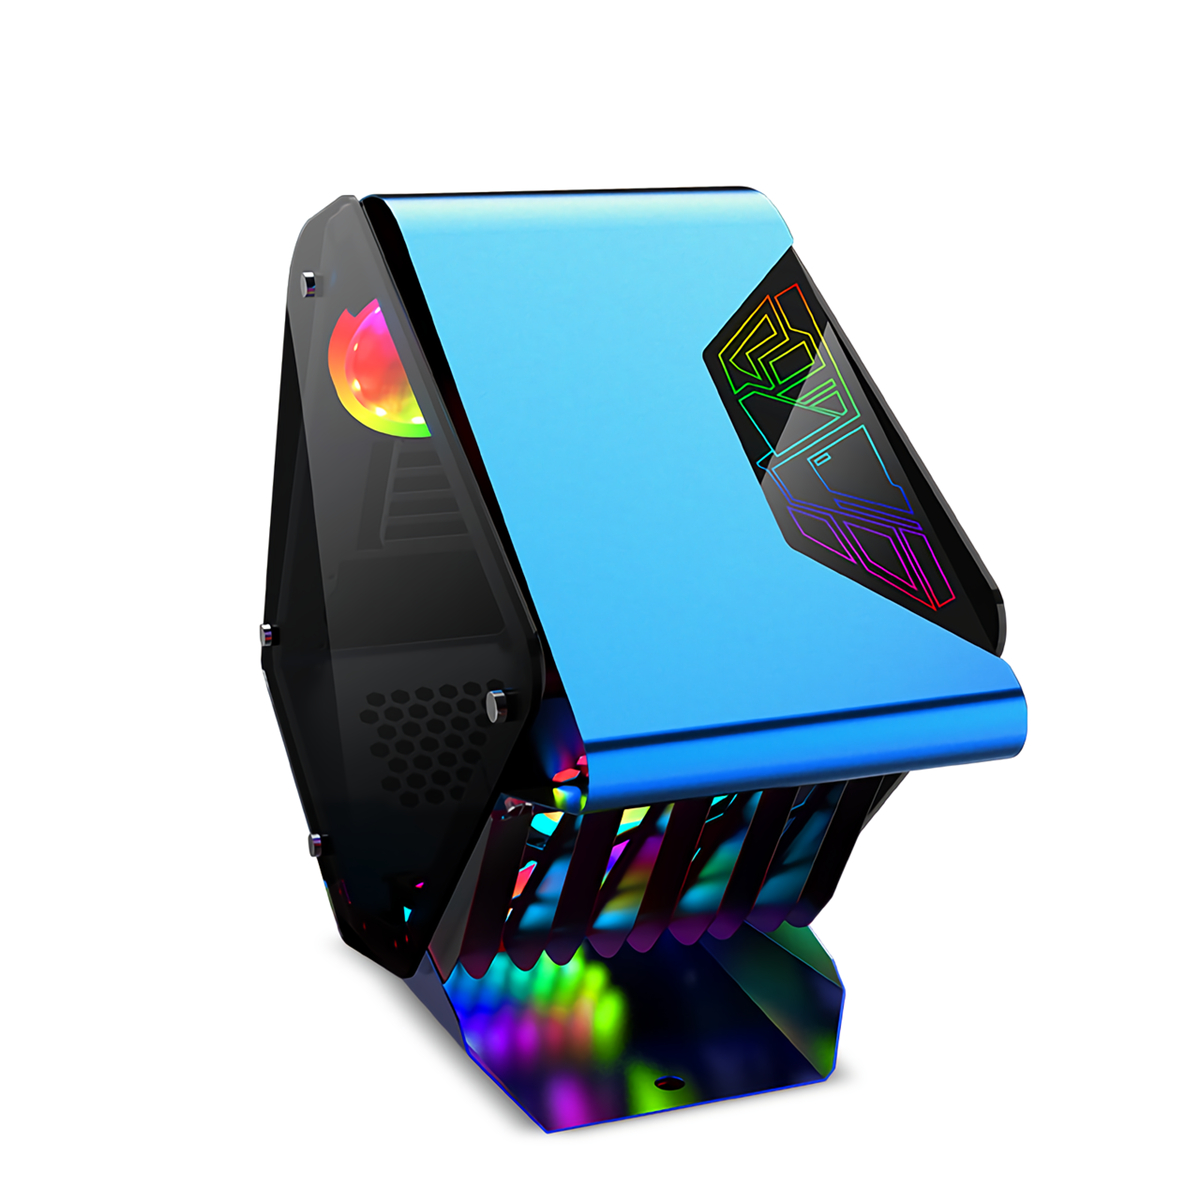 Find EVESKY Little Monster RGB Computer Case CPU M ATX Water Cooling Double sided Transparent Glass Gaming Chassis for Sale on Gipsybee.com with cryptocurrencies